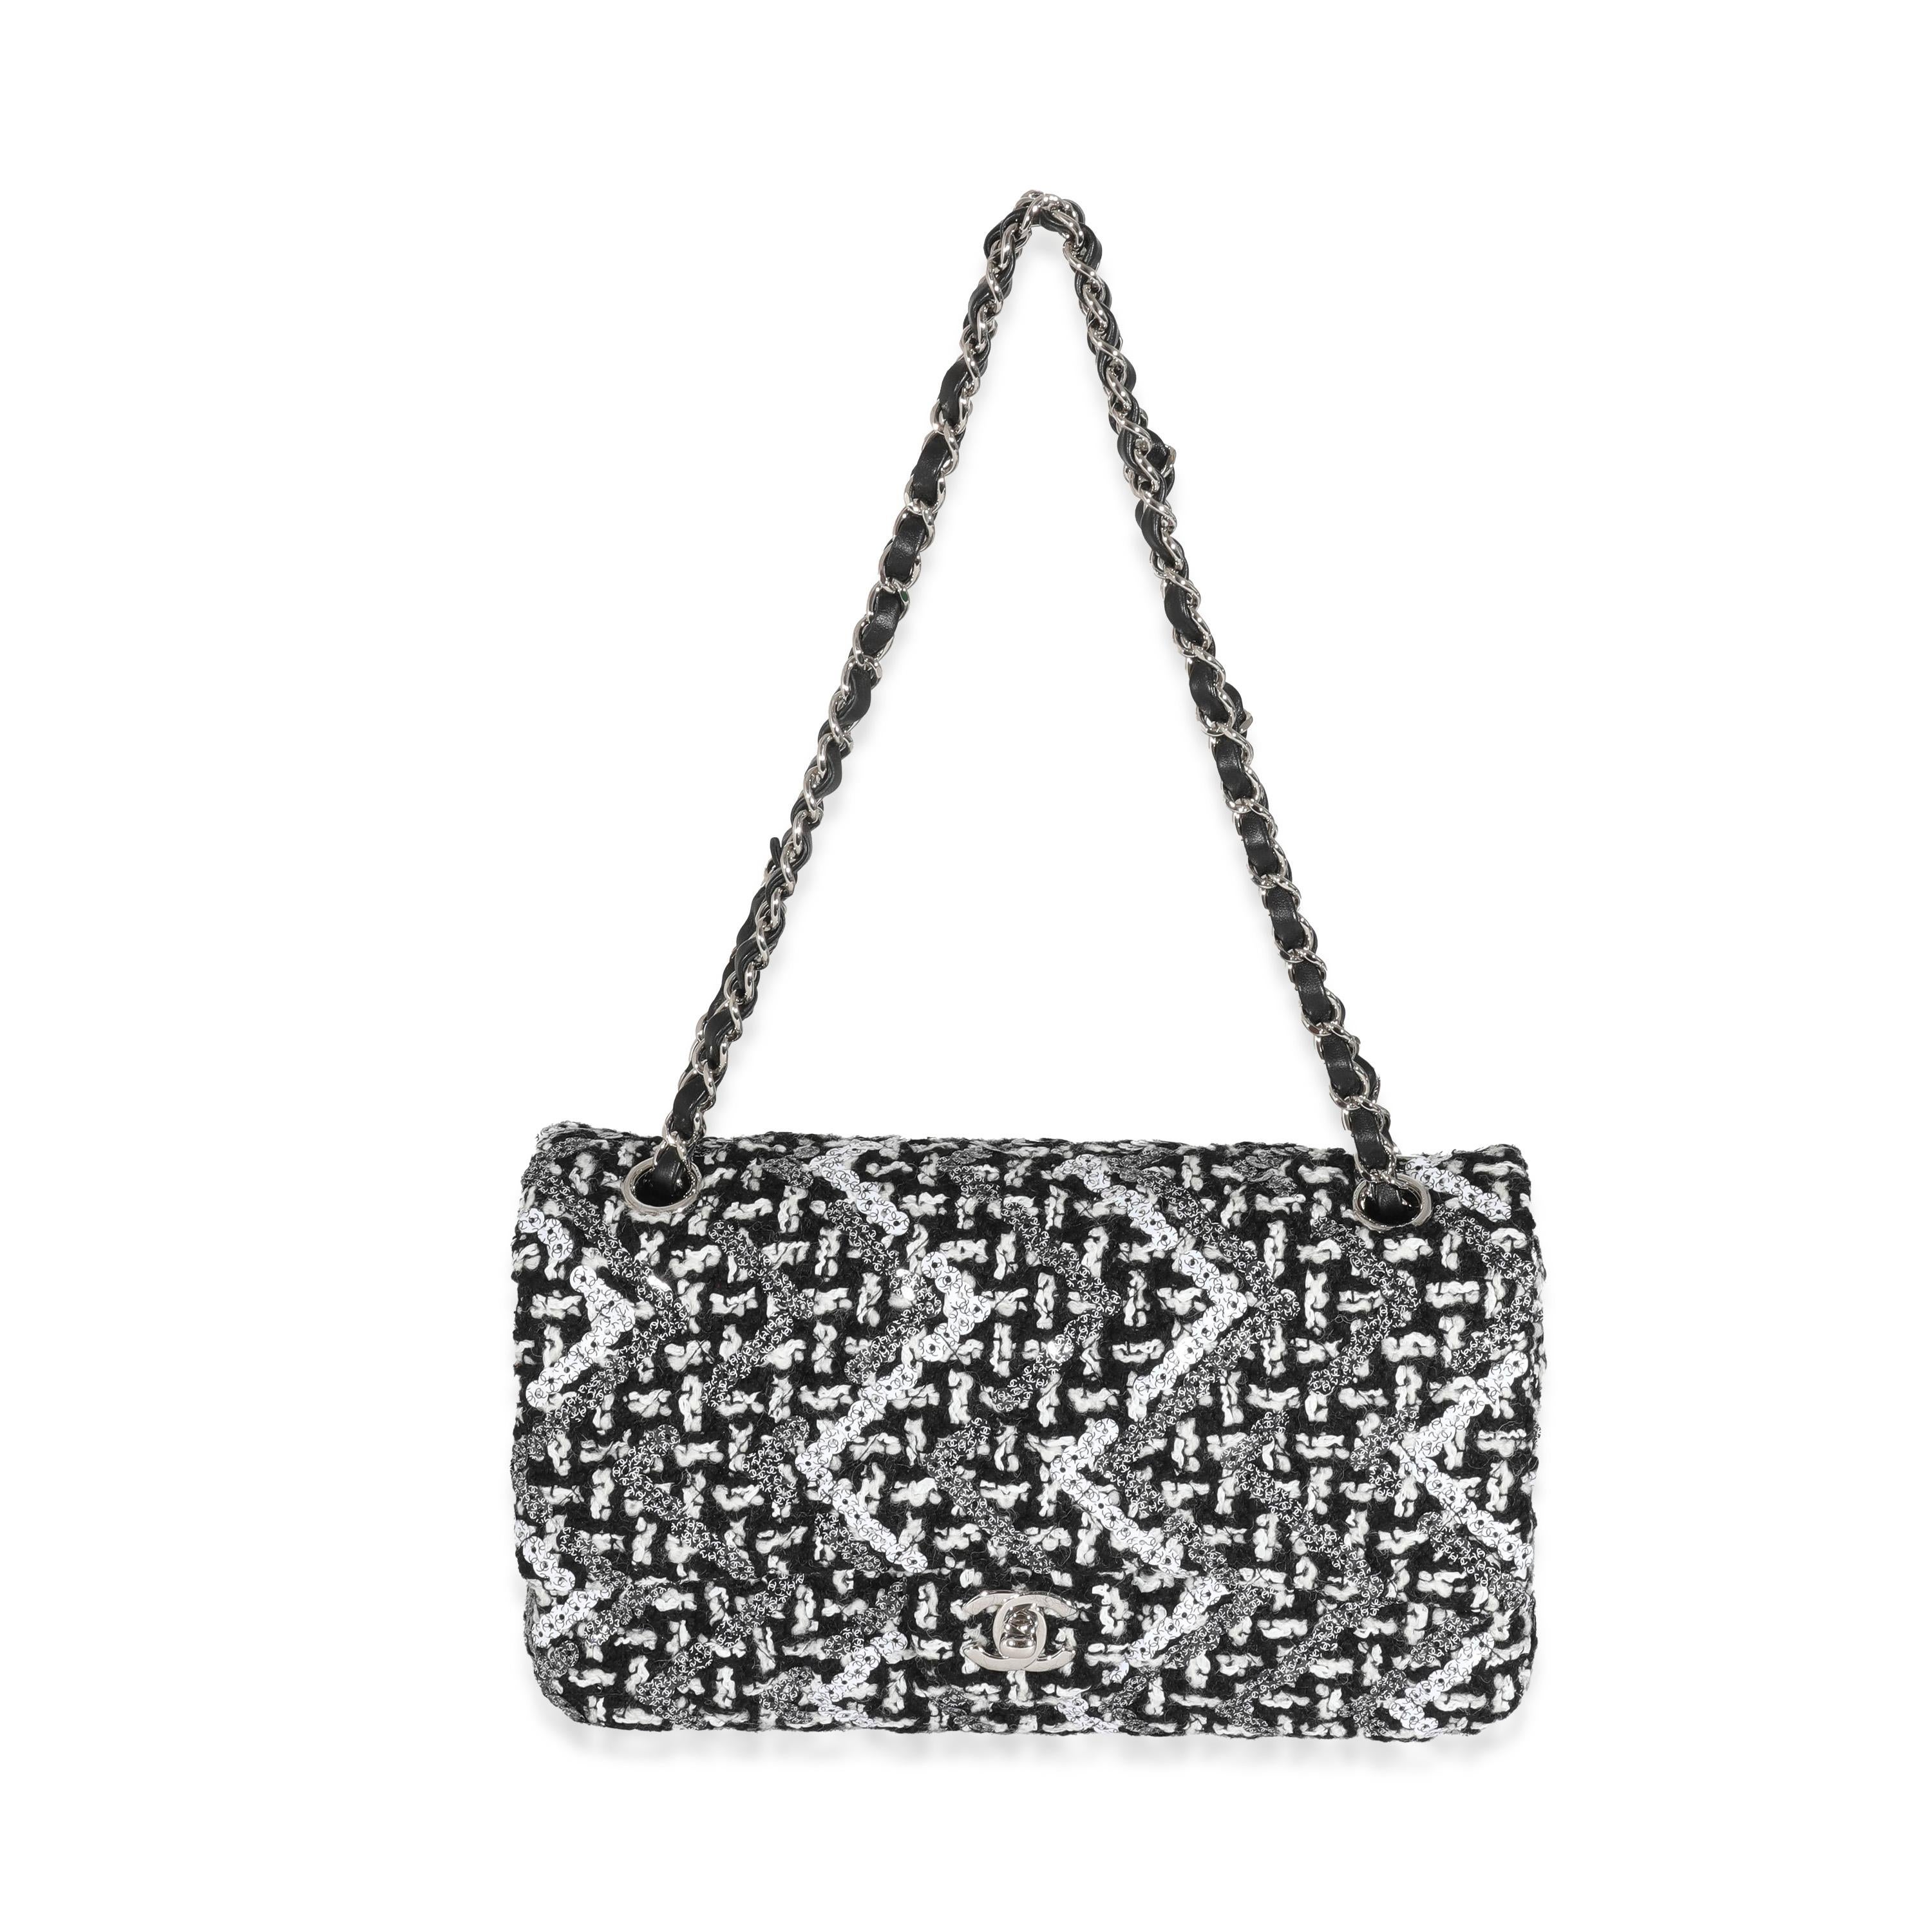 Listing Title: Chanel Black & White Crochet & Sequin Medium Double Flap
SKU: 131493
Condition: Pre-owned 
Condition Description: A timeless classic that never goes out of style, the flap bag from Chanel dates back to 1955 and has seen a number of